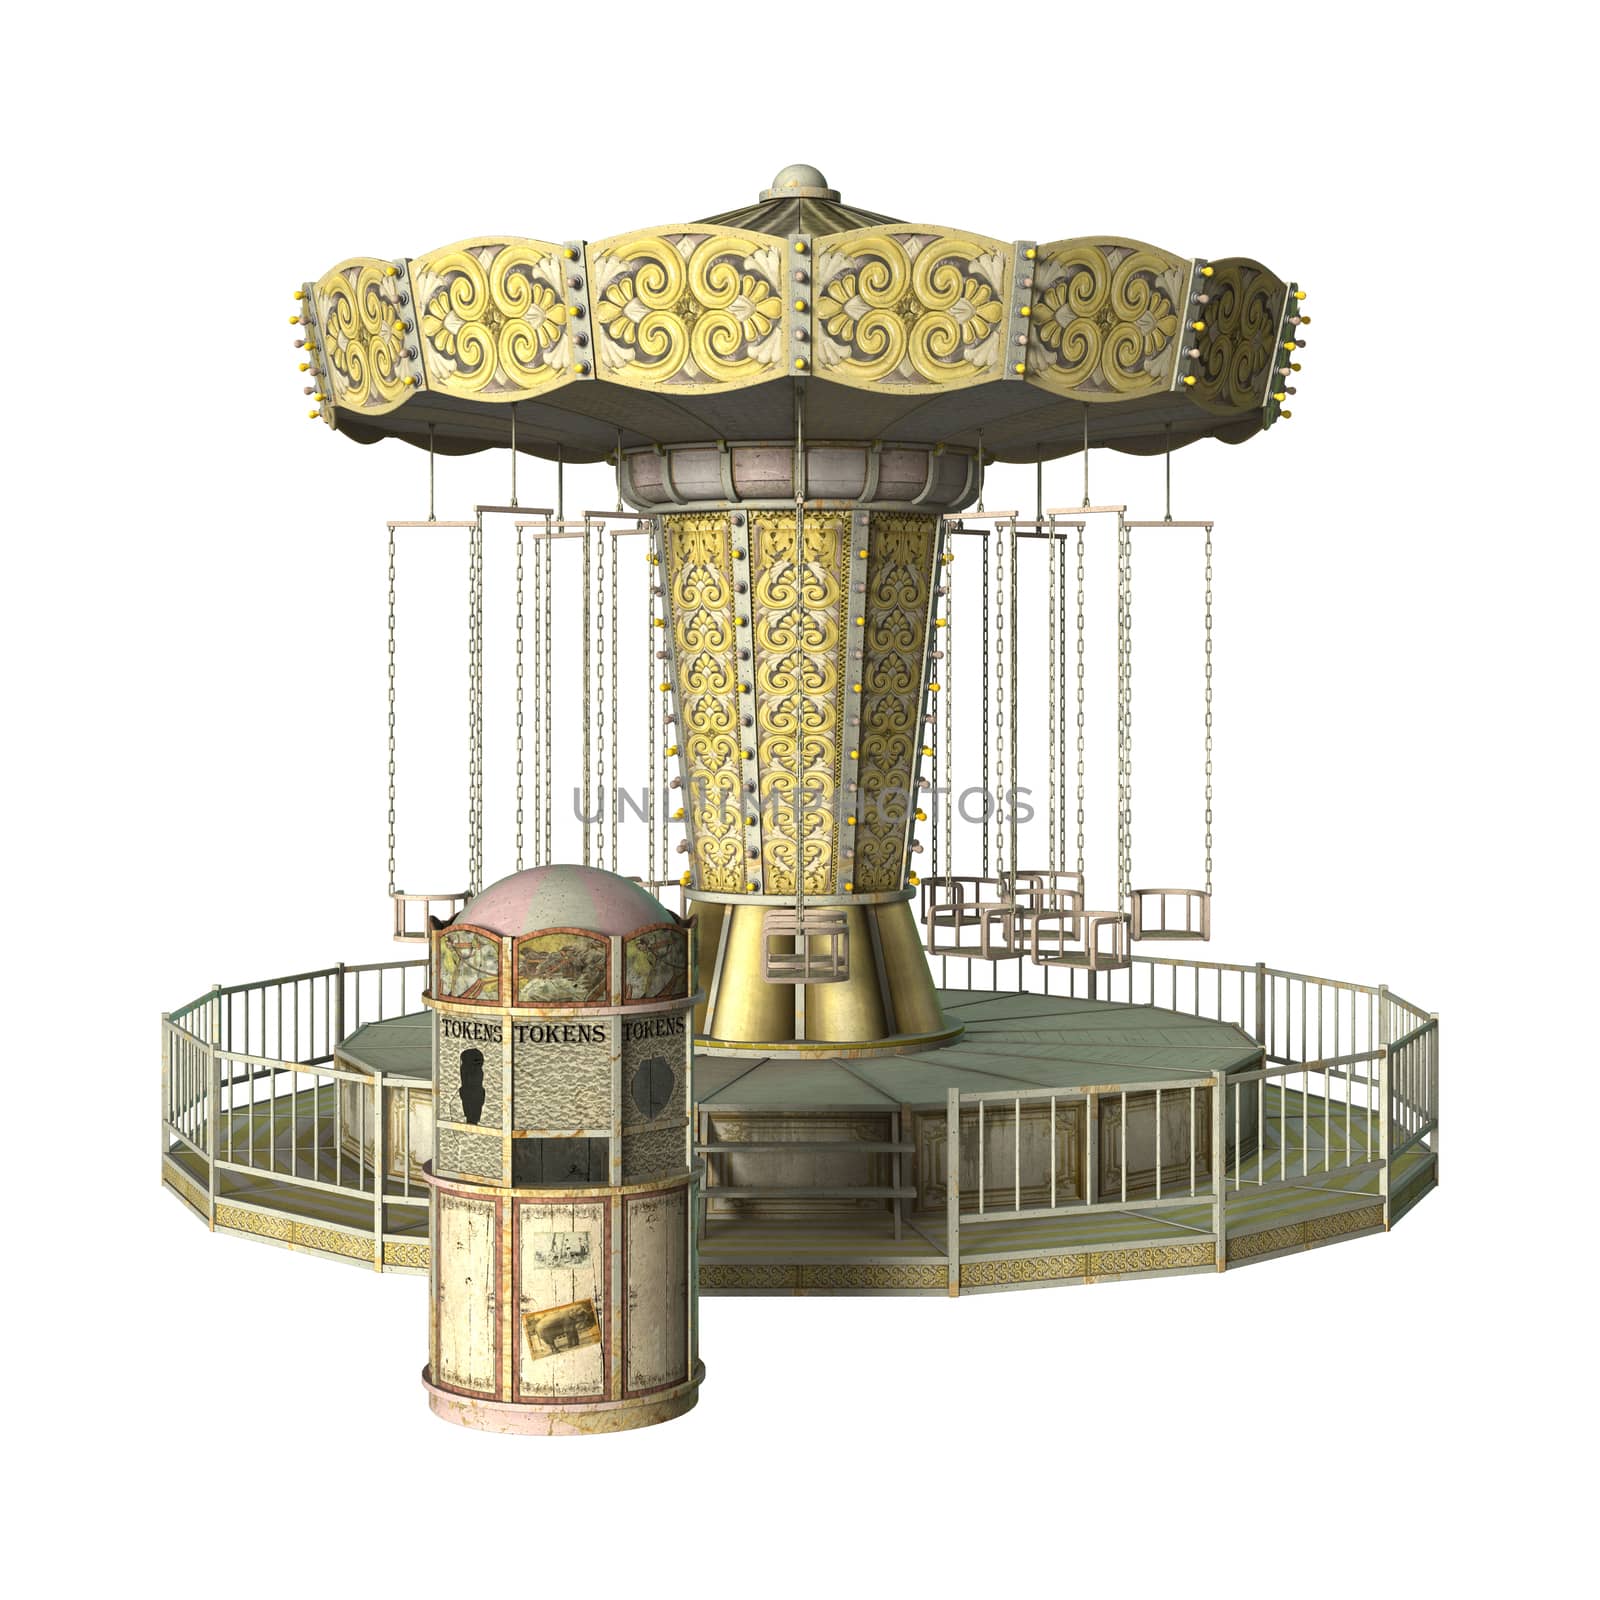 3D digital render of a vintage swing carousel and a ticket booth isolated on white background